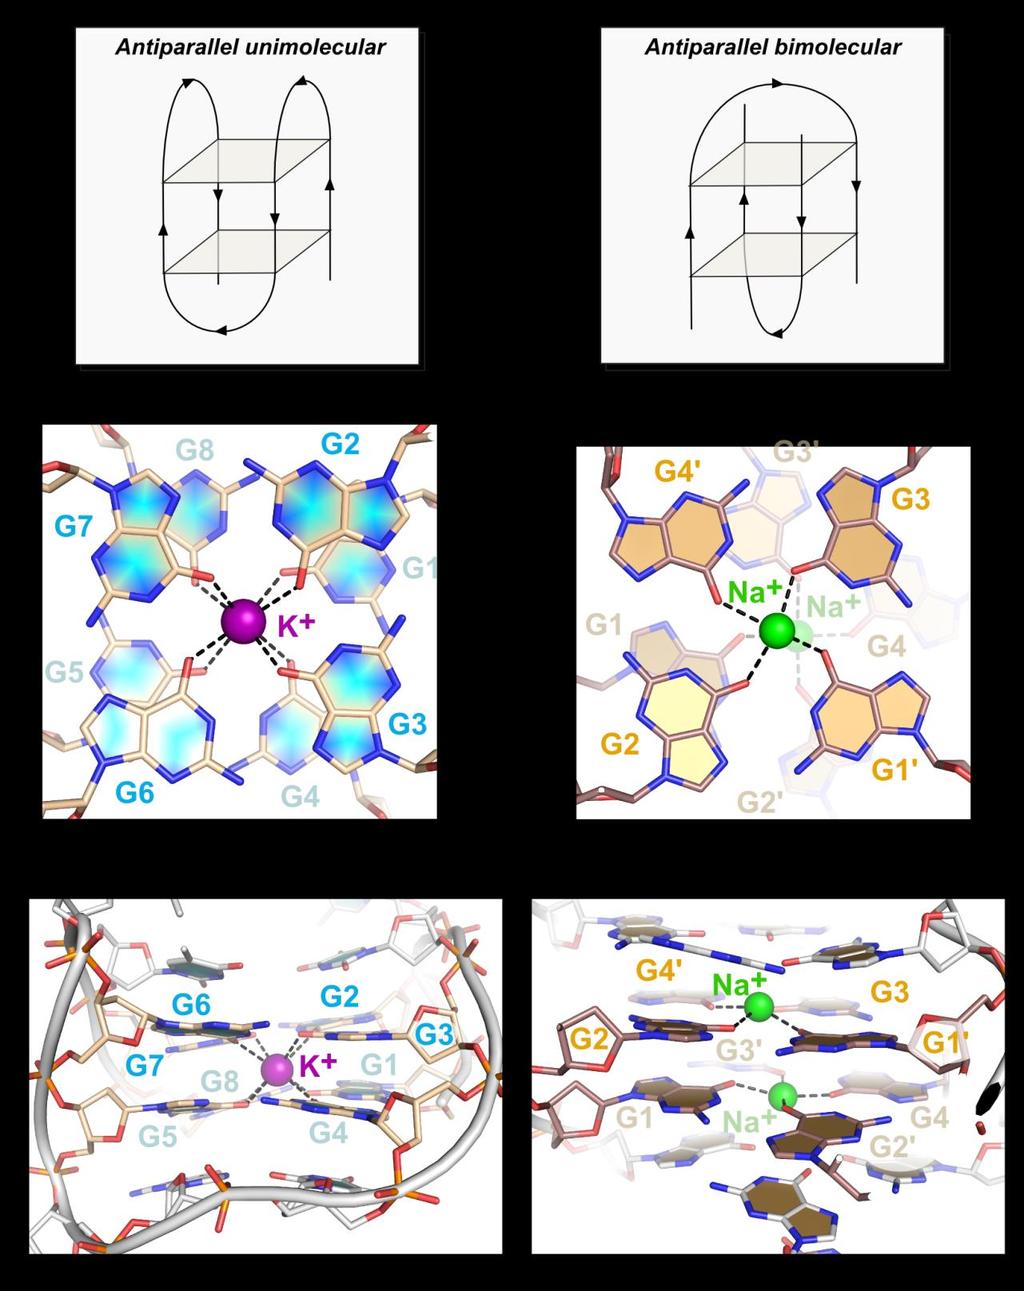 Supplementary Fig. 7. Examples of G-quadruplexes stabilized by monovalent cations.